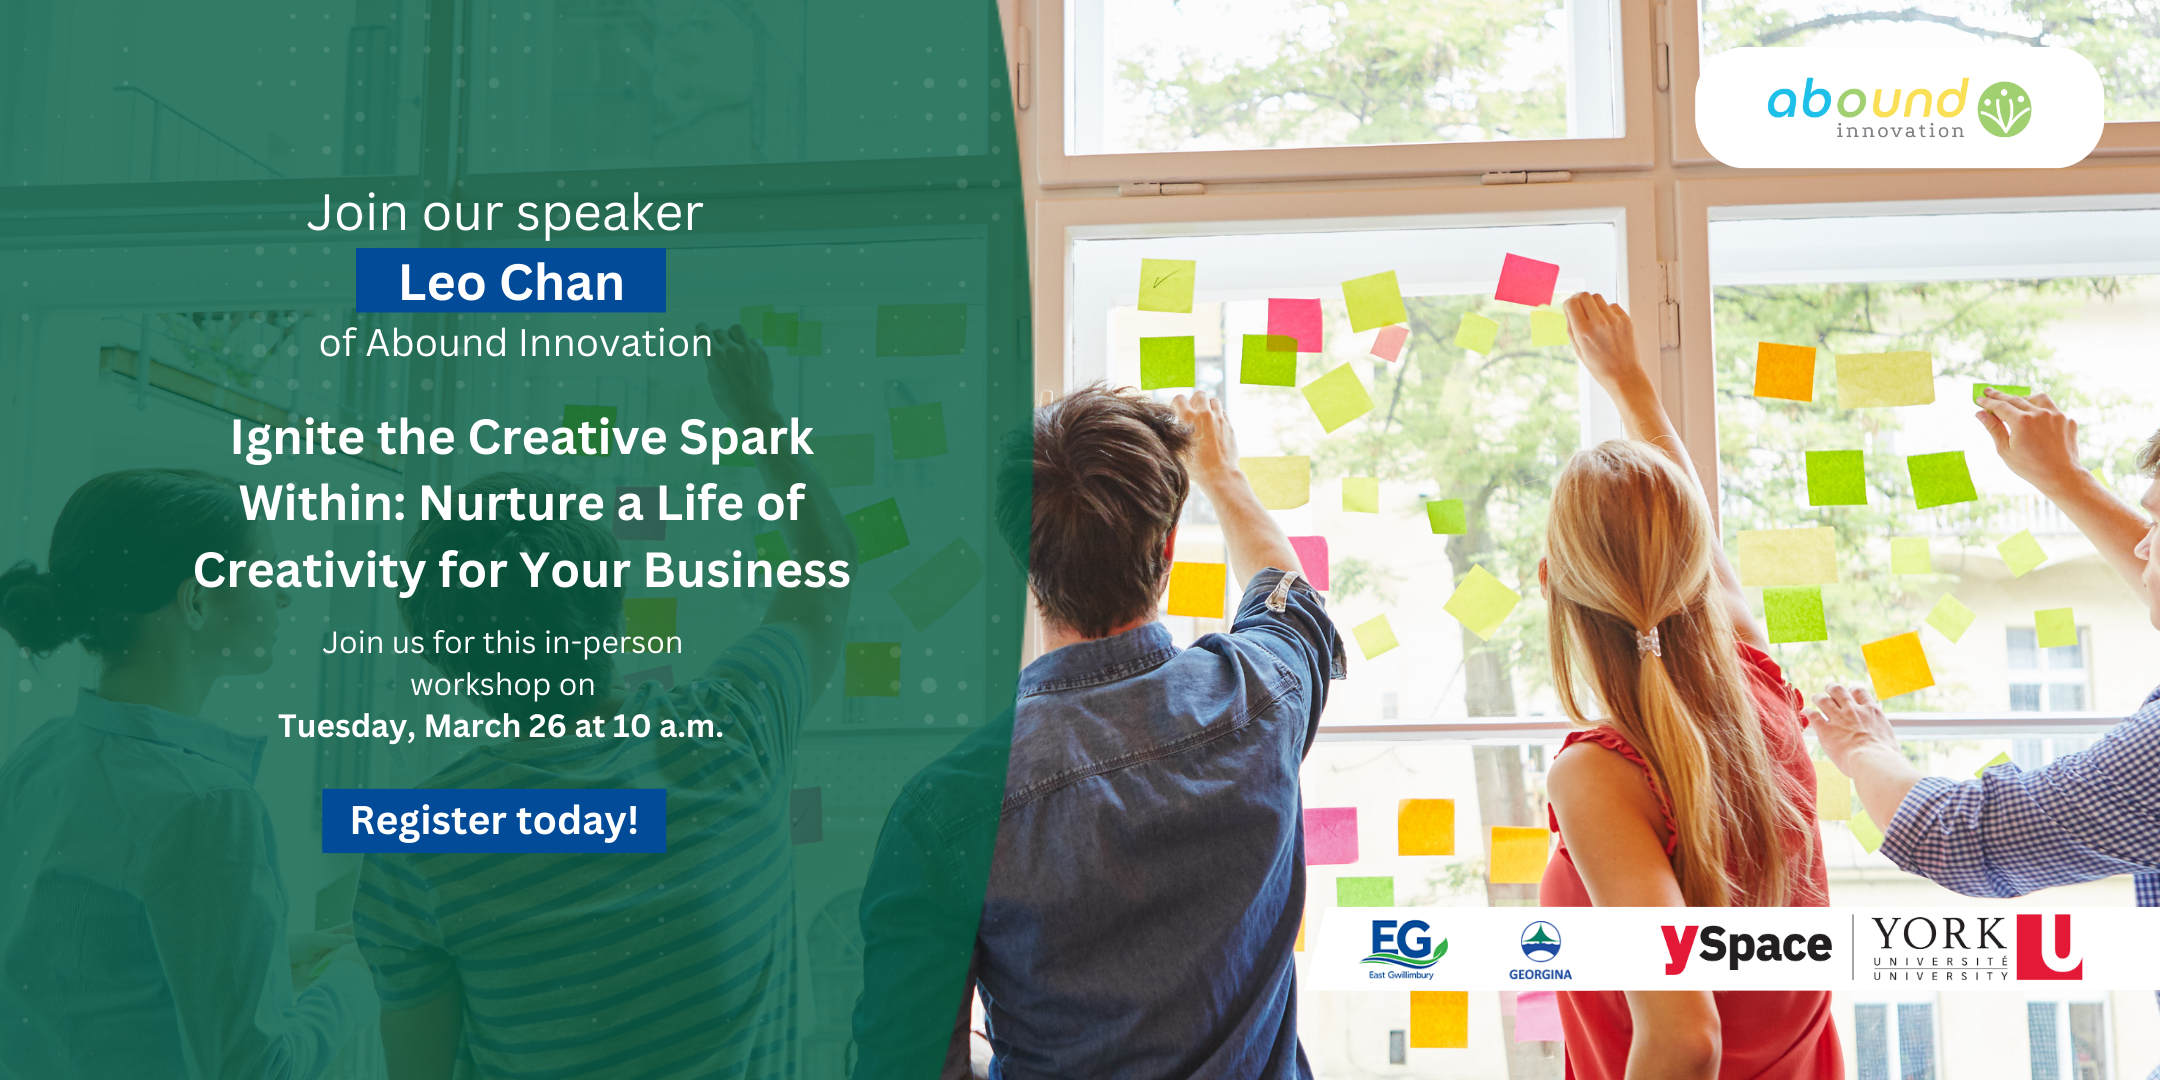 Ignite the creative spark within: nurture a life of creativity